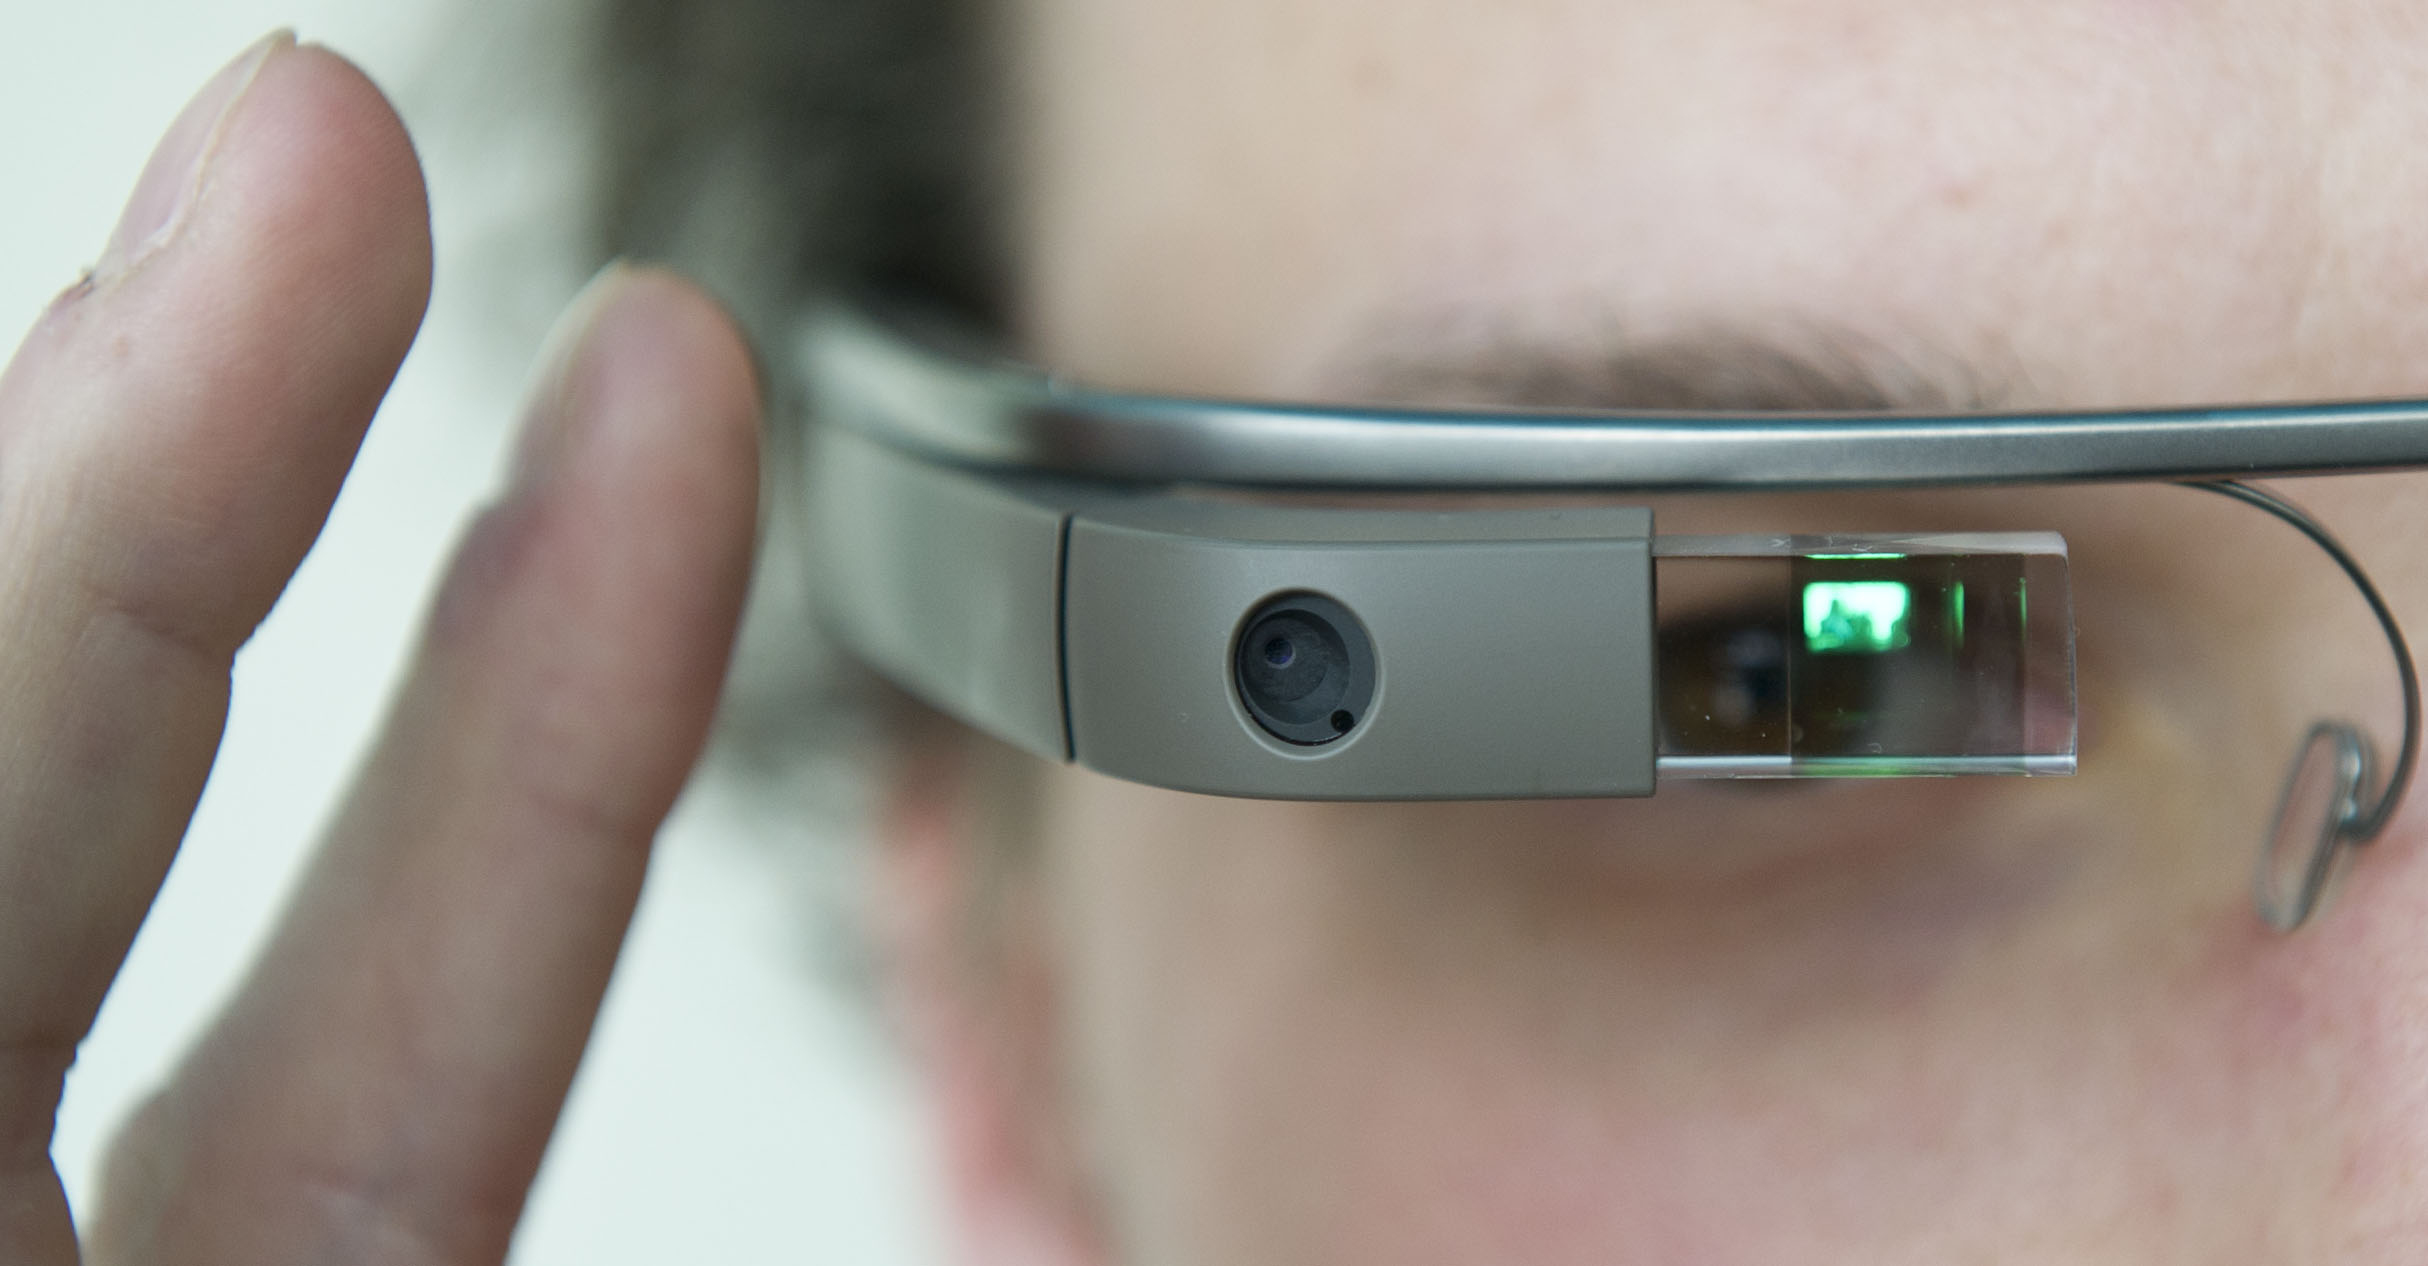 A visitor of the "NEXT Berlin" conference tries out the Google Glass on April 24, 2013 in Berlin. (DPA/AFP/Getty Images)